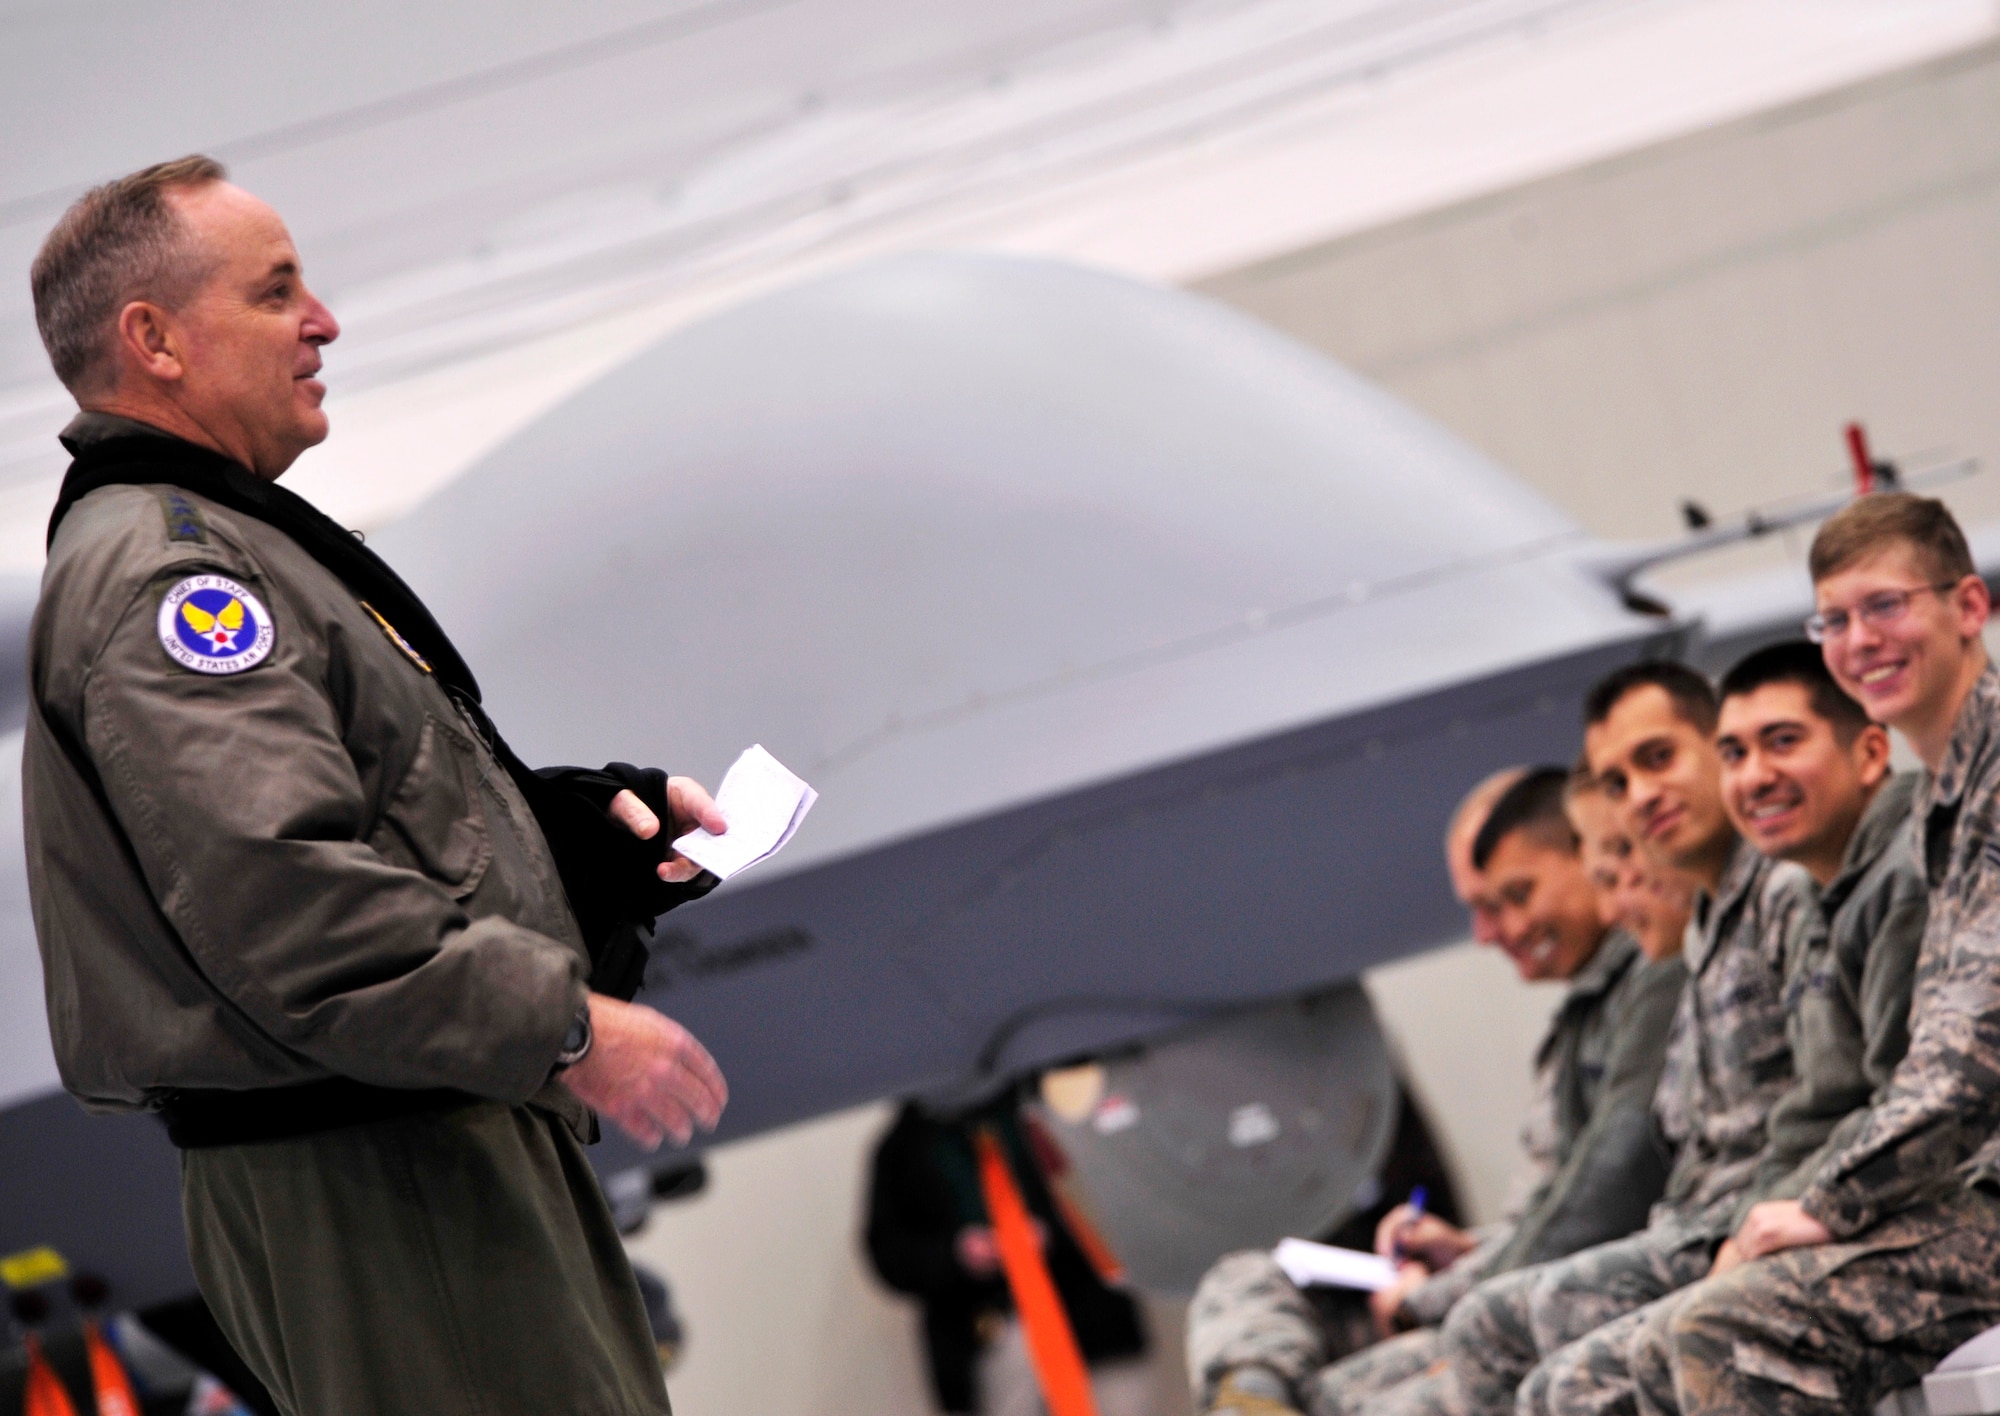 CREECH AIR FORCE BASE, Nev. -- Air Force Chief of Staff Gen. Mark A. Welsh III speaks to Airmen during an all call, Jan. 14, 2013. Welsh commended the Creech Airmen during an all call for their adaptability and ability to overcome obstacles and fulfill their motto: “Hunters save lives.” (432d Wing/432d Air Expeditionary Wing Public Affairs)